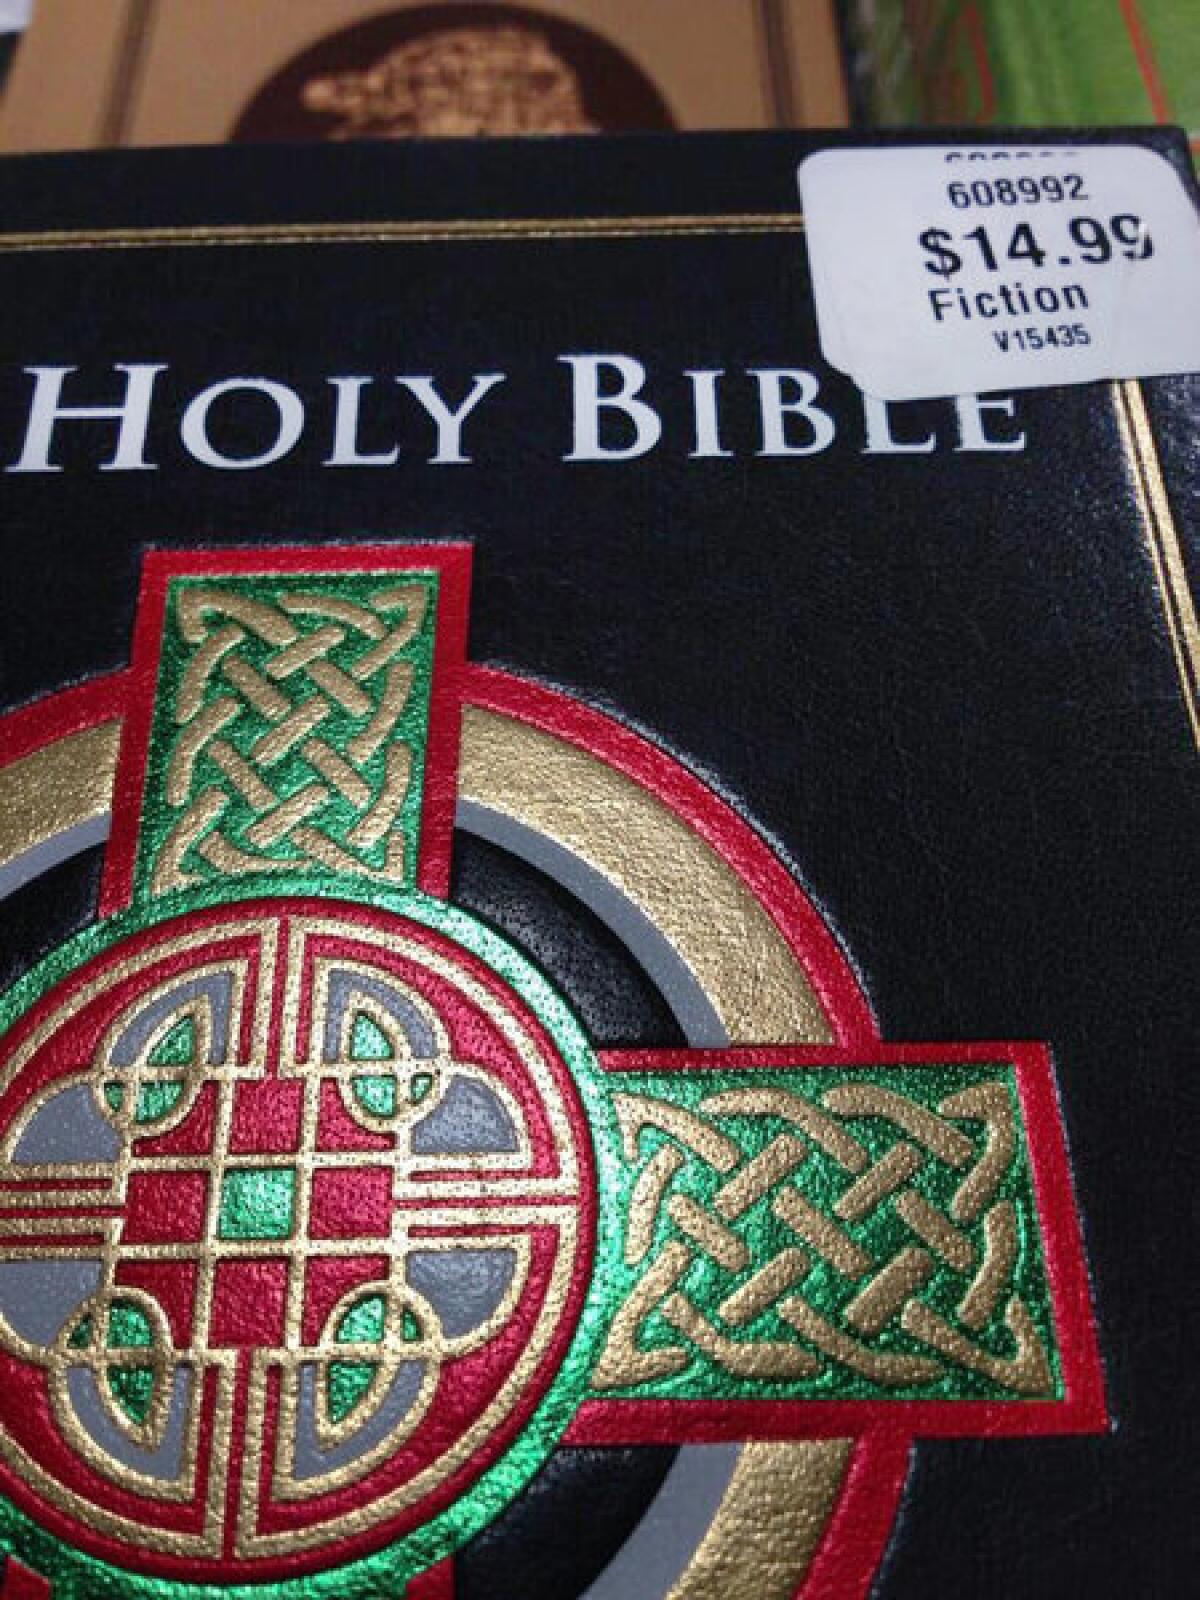 A $14.99 Bible at a Costco store in Simi Valley is labeled fiction; the store apologized and said it will change the labels.